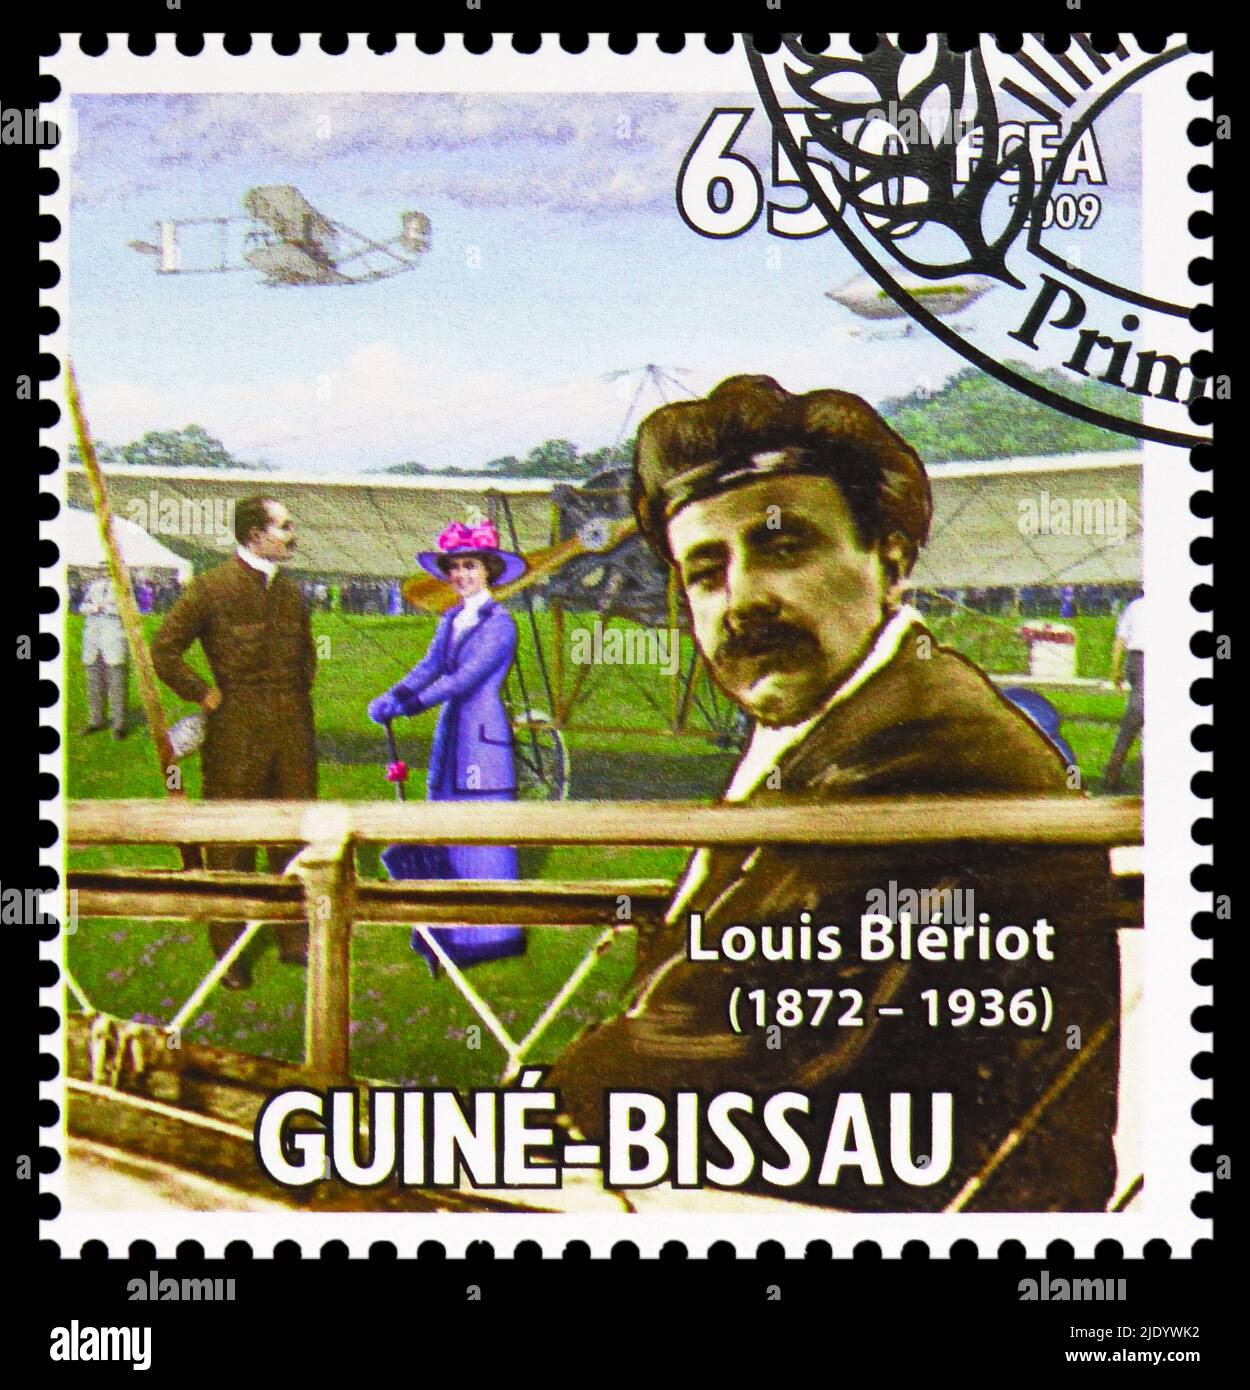 MOSCOW, RUSSIA - JUNE 17, 2022: Postage stamp printed in Guinea-Bissau shows Louis Bleriot and plane, serie, circa 2009 Stock Photo